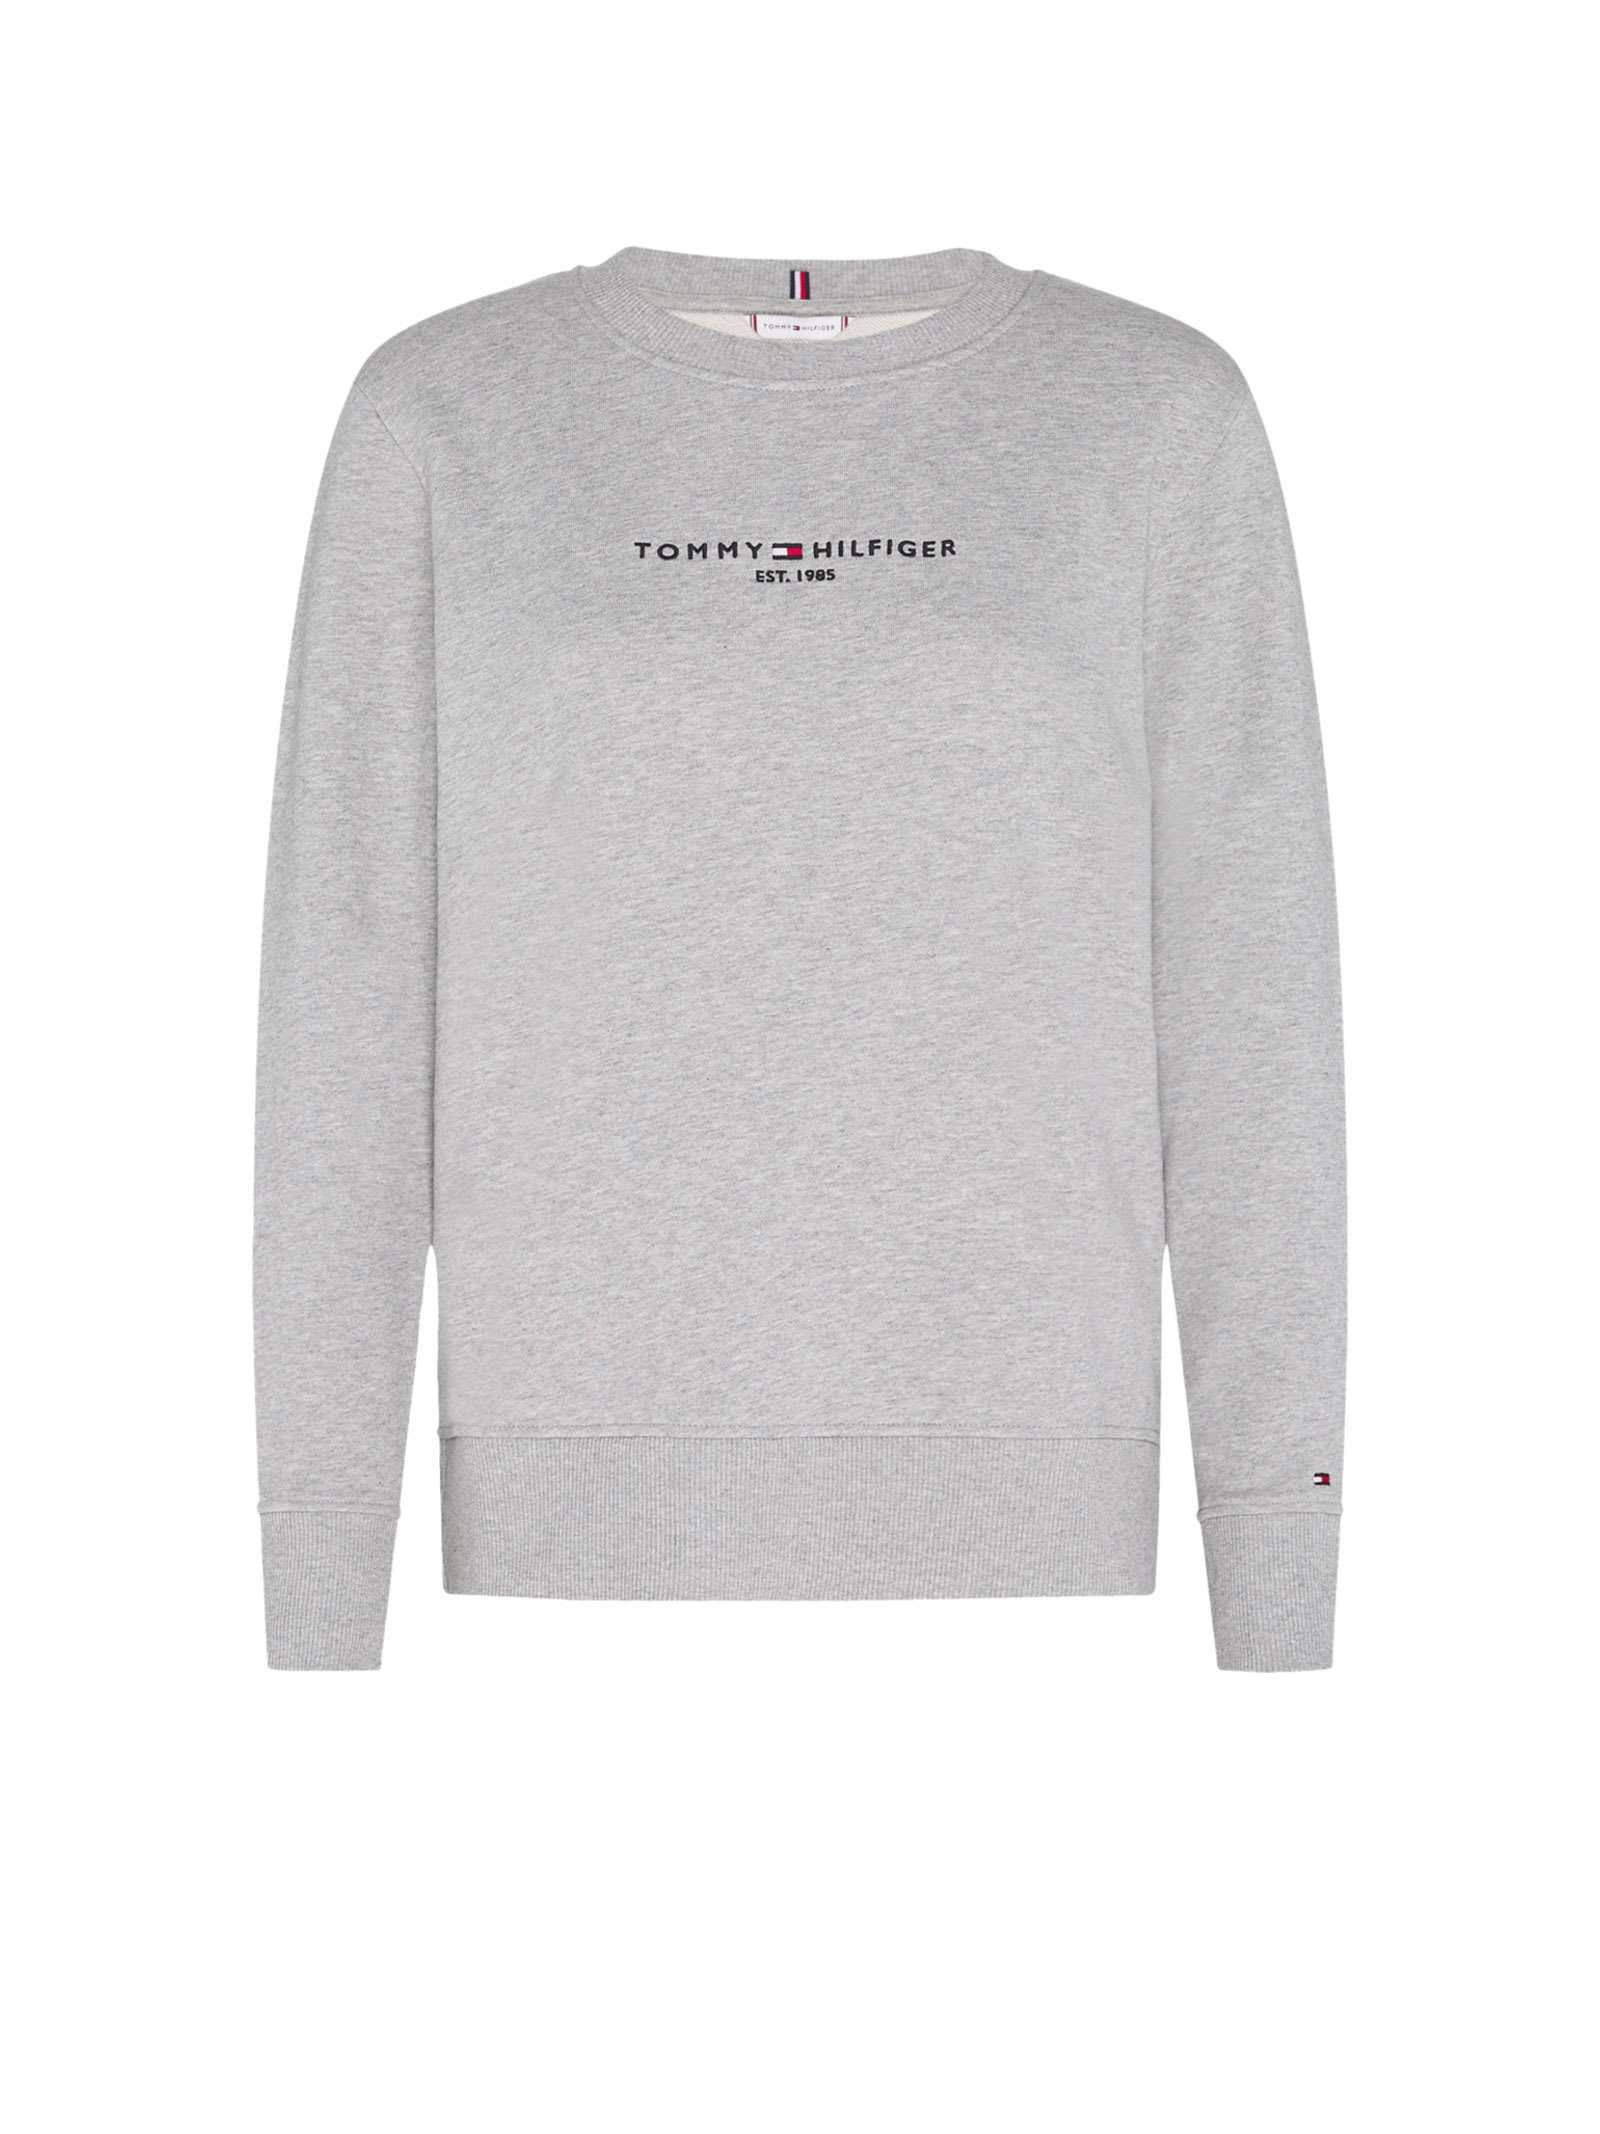 Tommy Hilfiger Gray Cotton Sweater With Logo